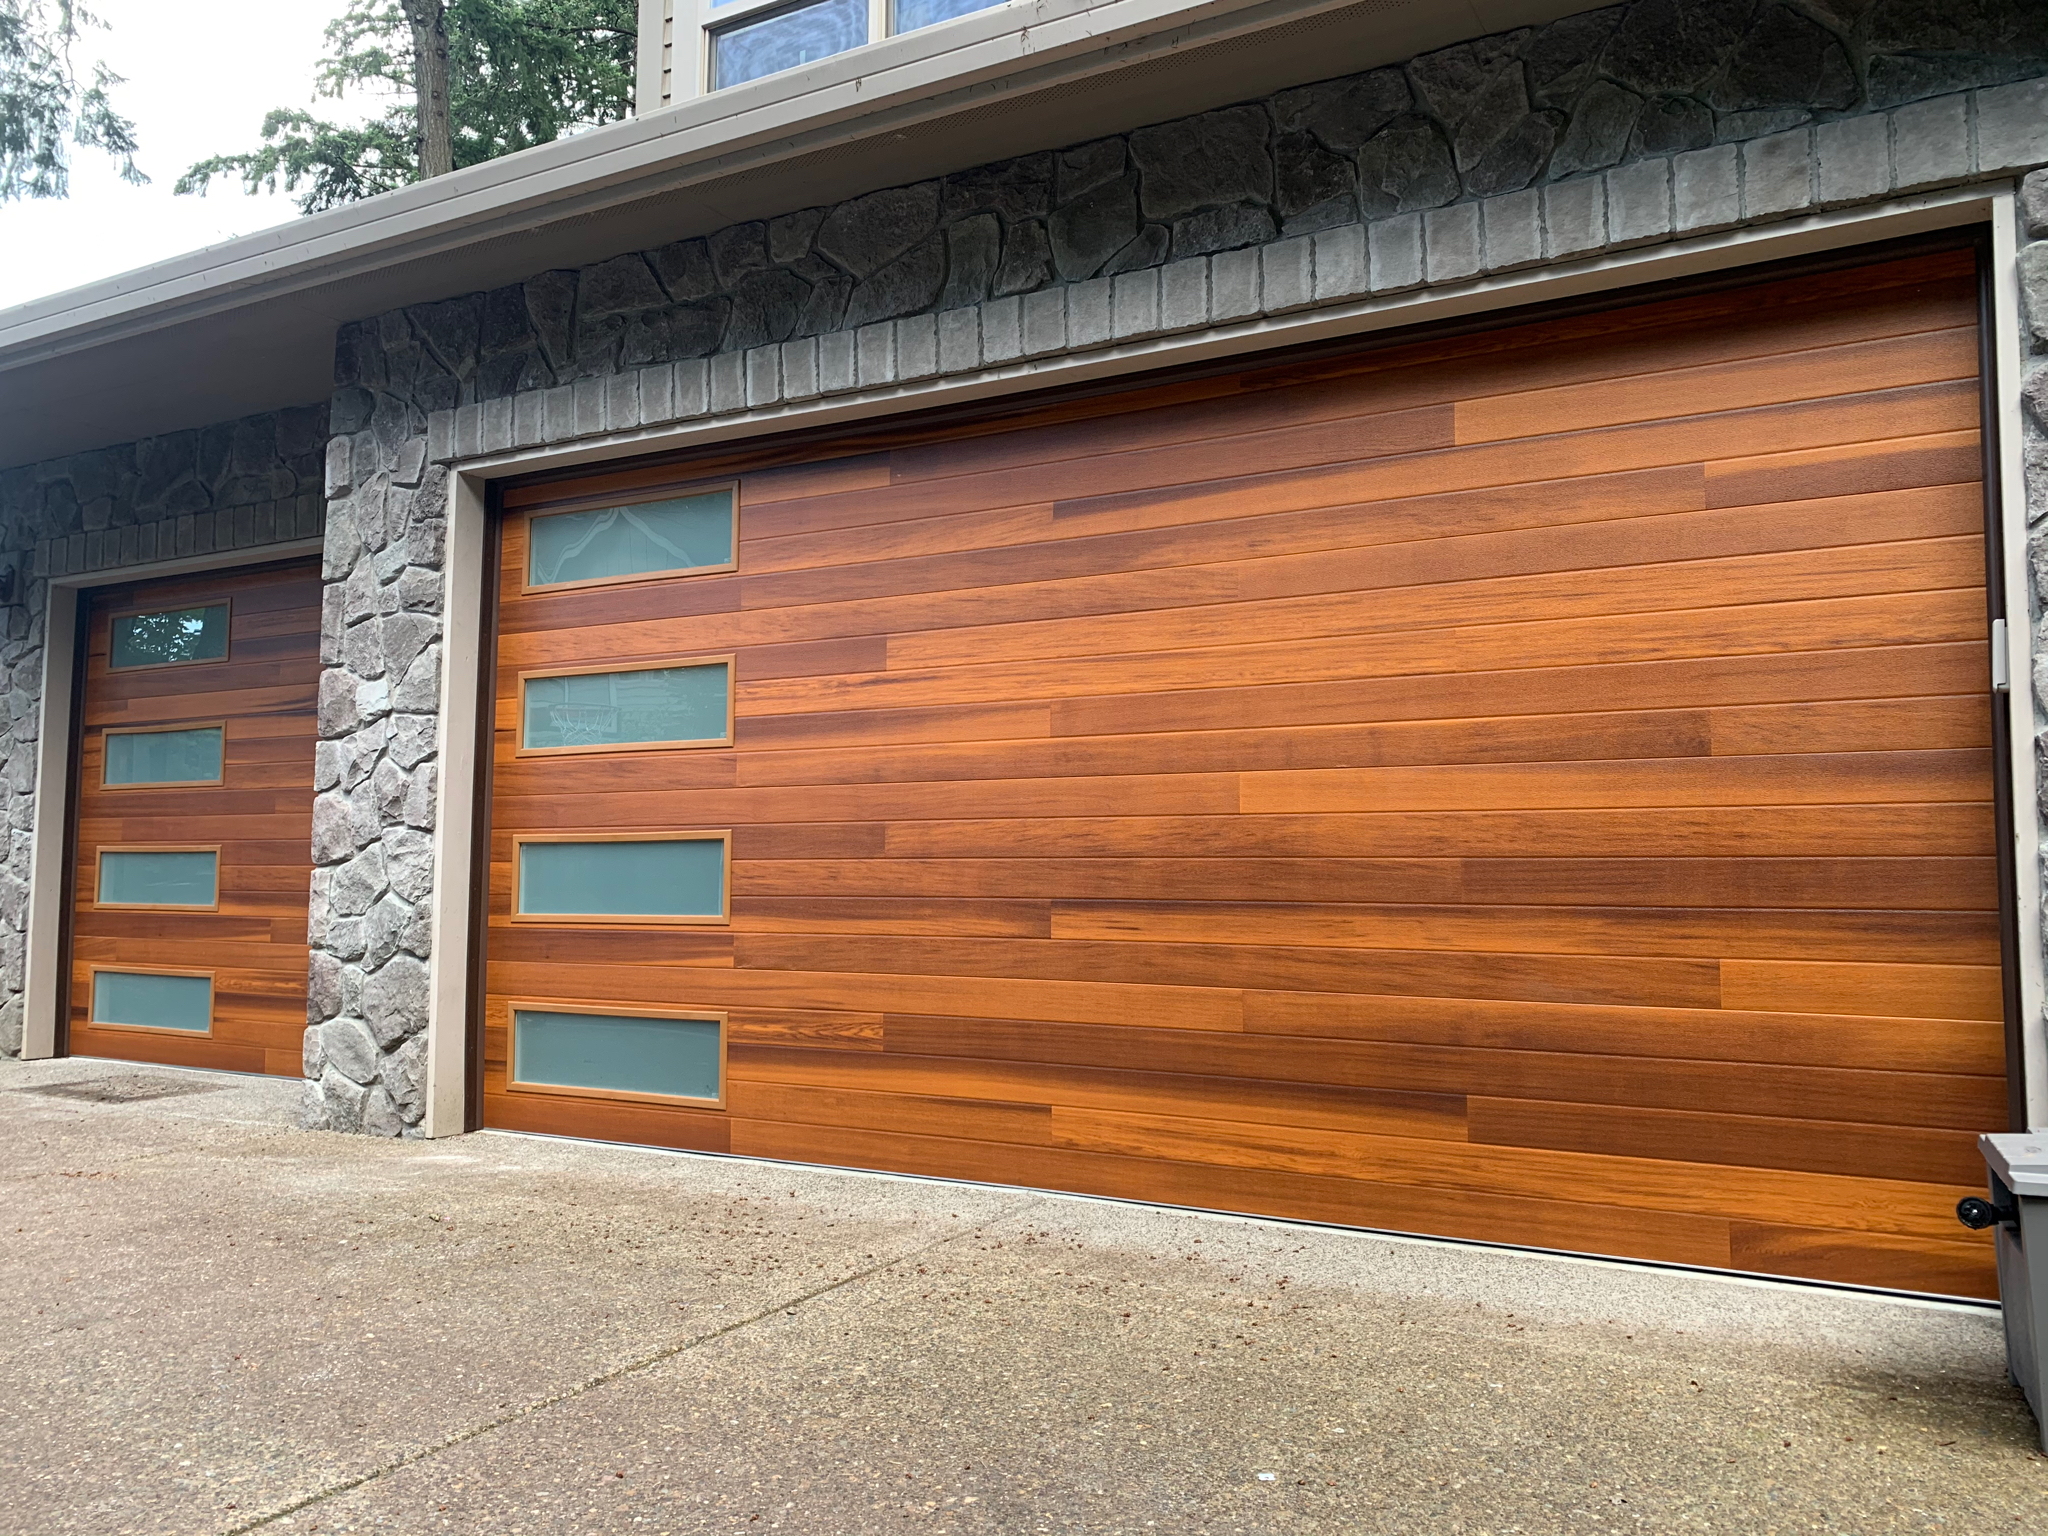 How to Clean Your Wooden Garage Doors Without Causing Damage post image alt text